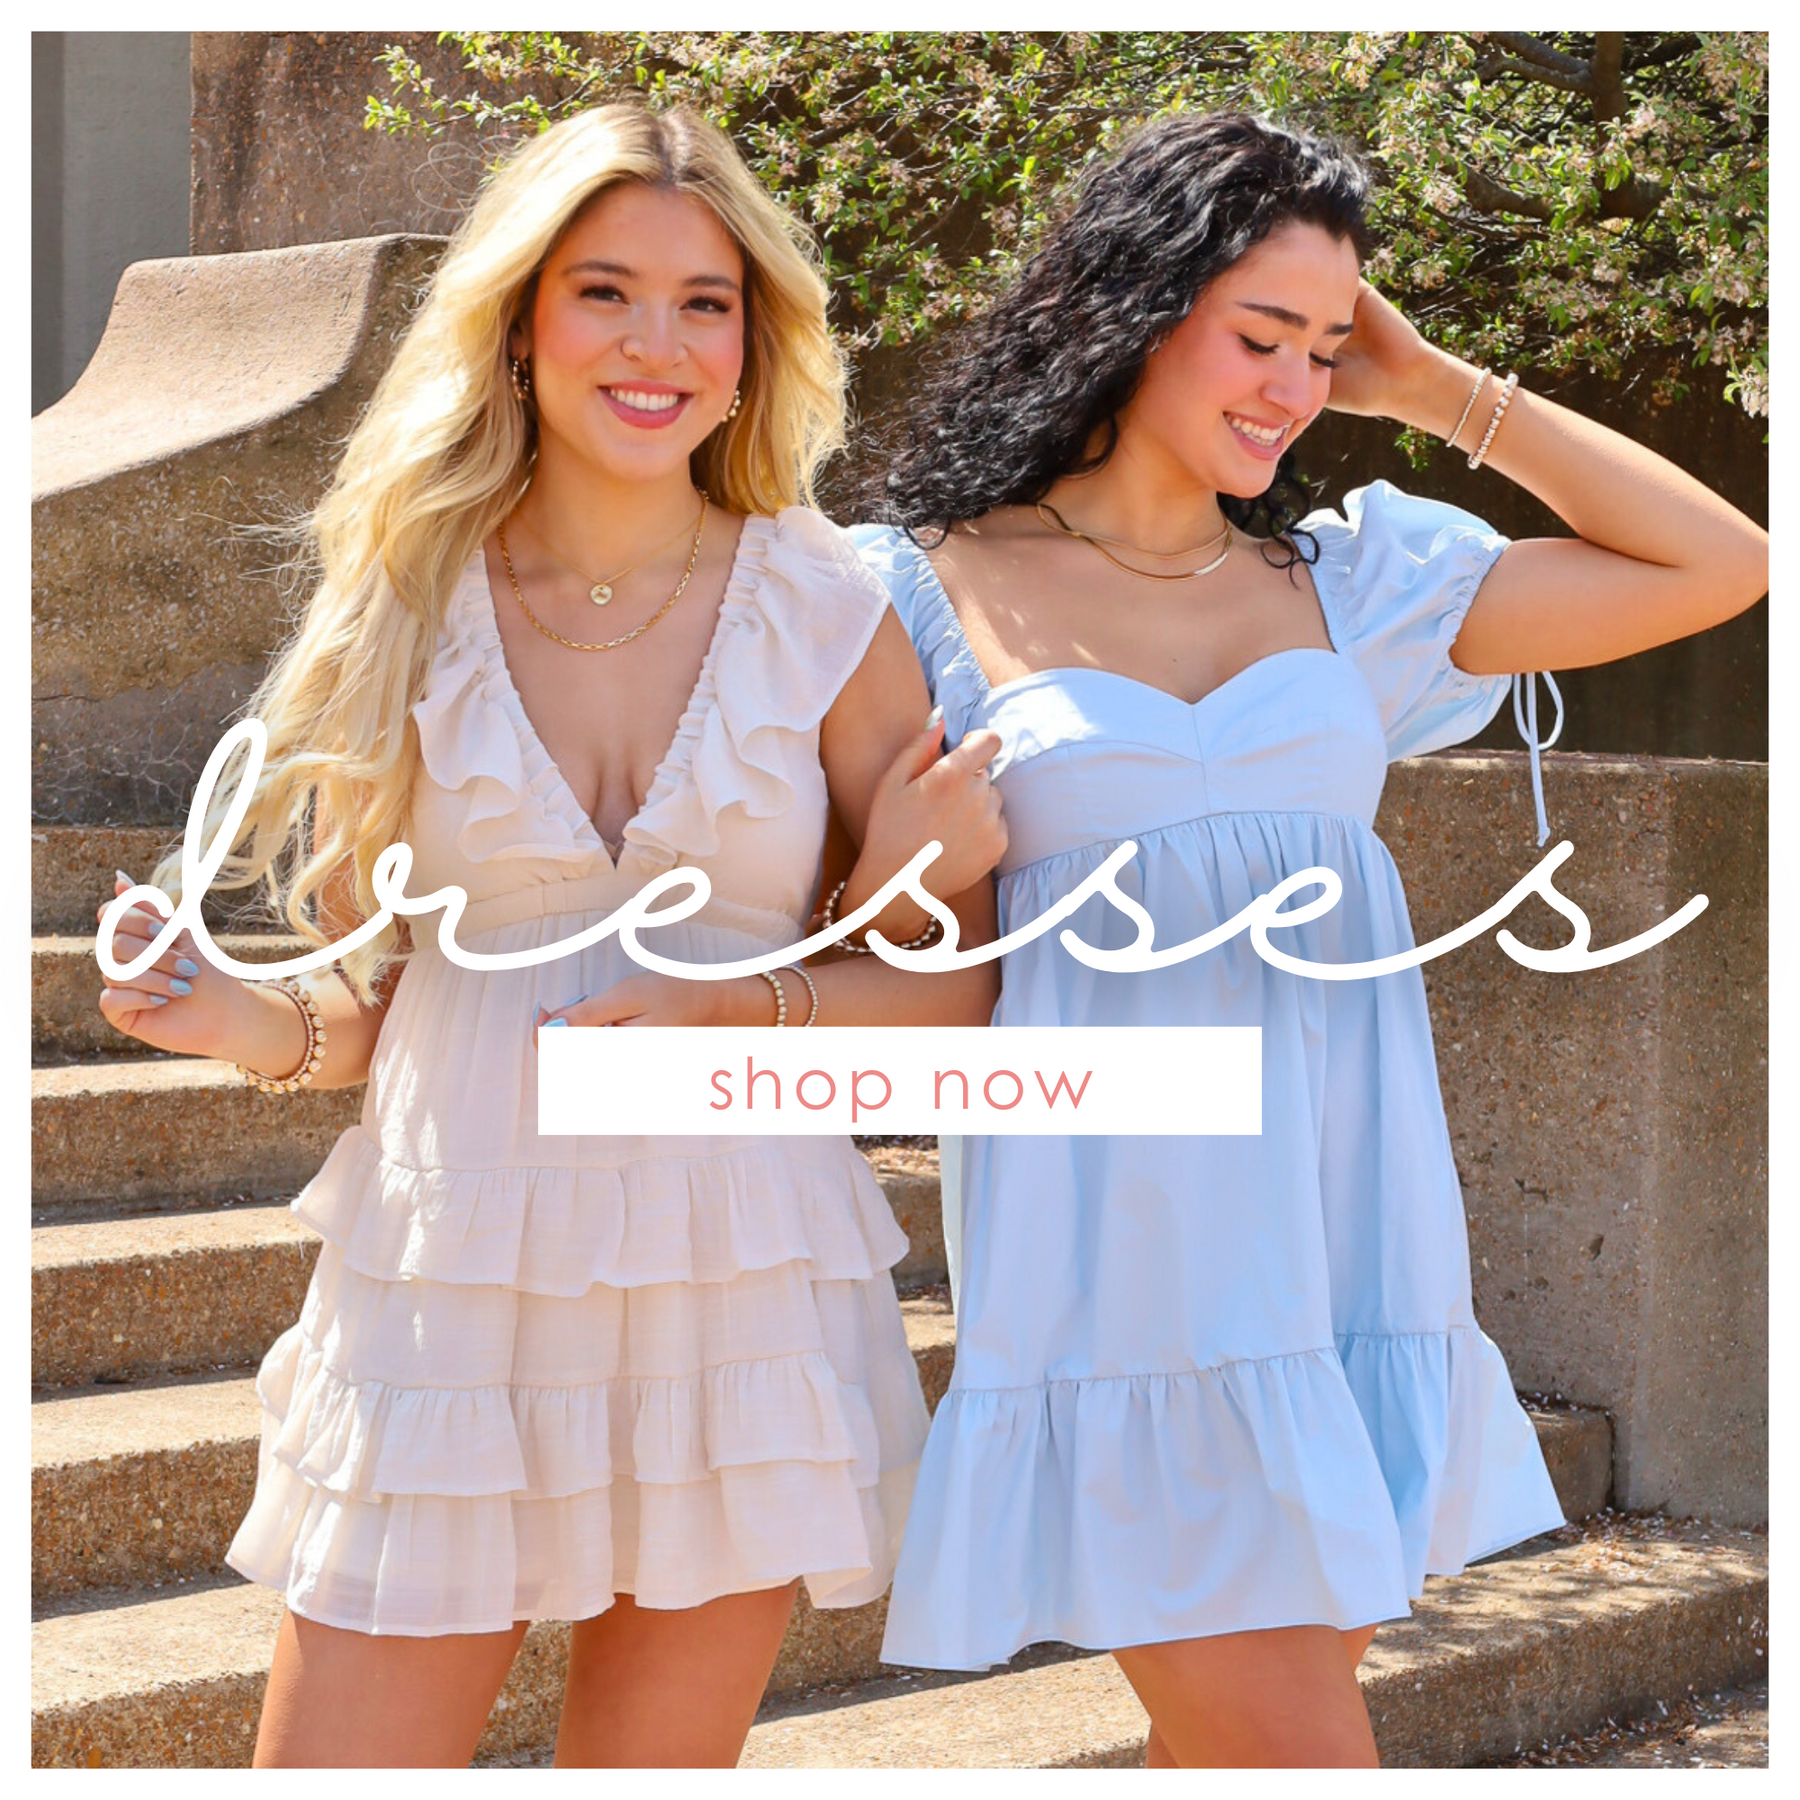 Shop our new dresses for any occasion this spring and summer.